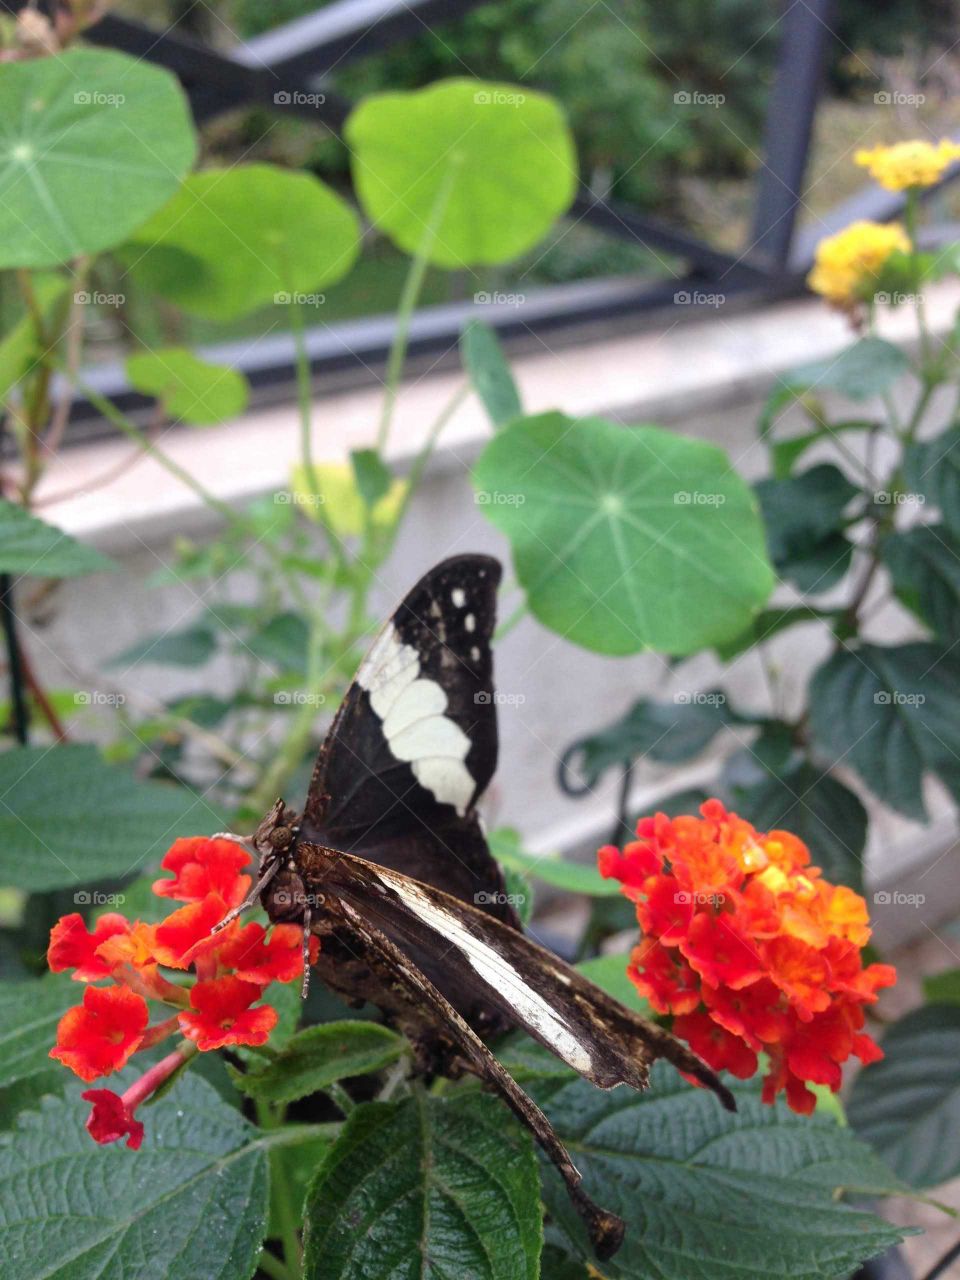 The Black and white butterfly on the red flowers